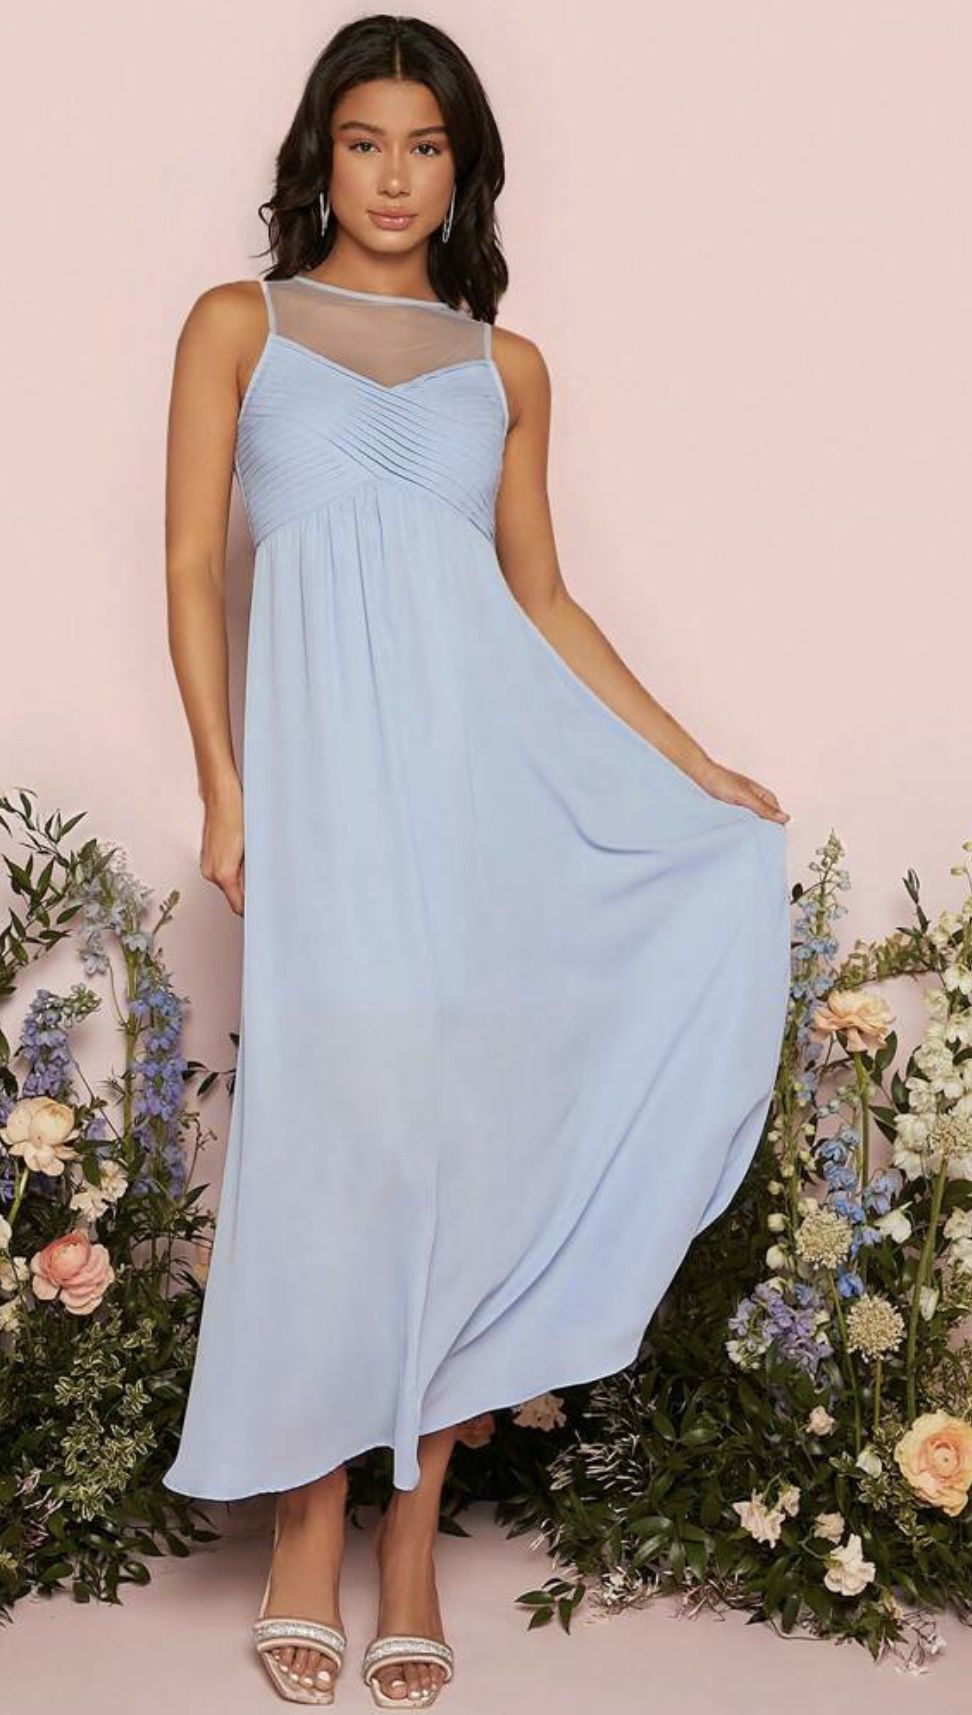 New Light Blue Bridesmaids Or Prom Dress Size S And  M